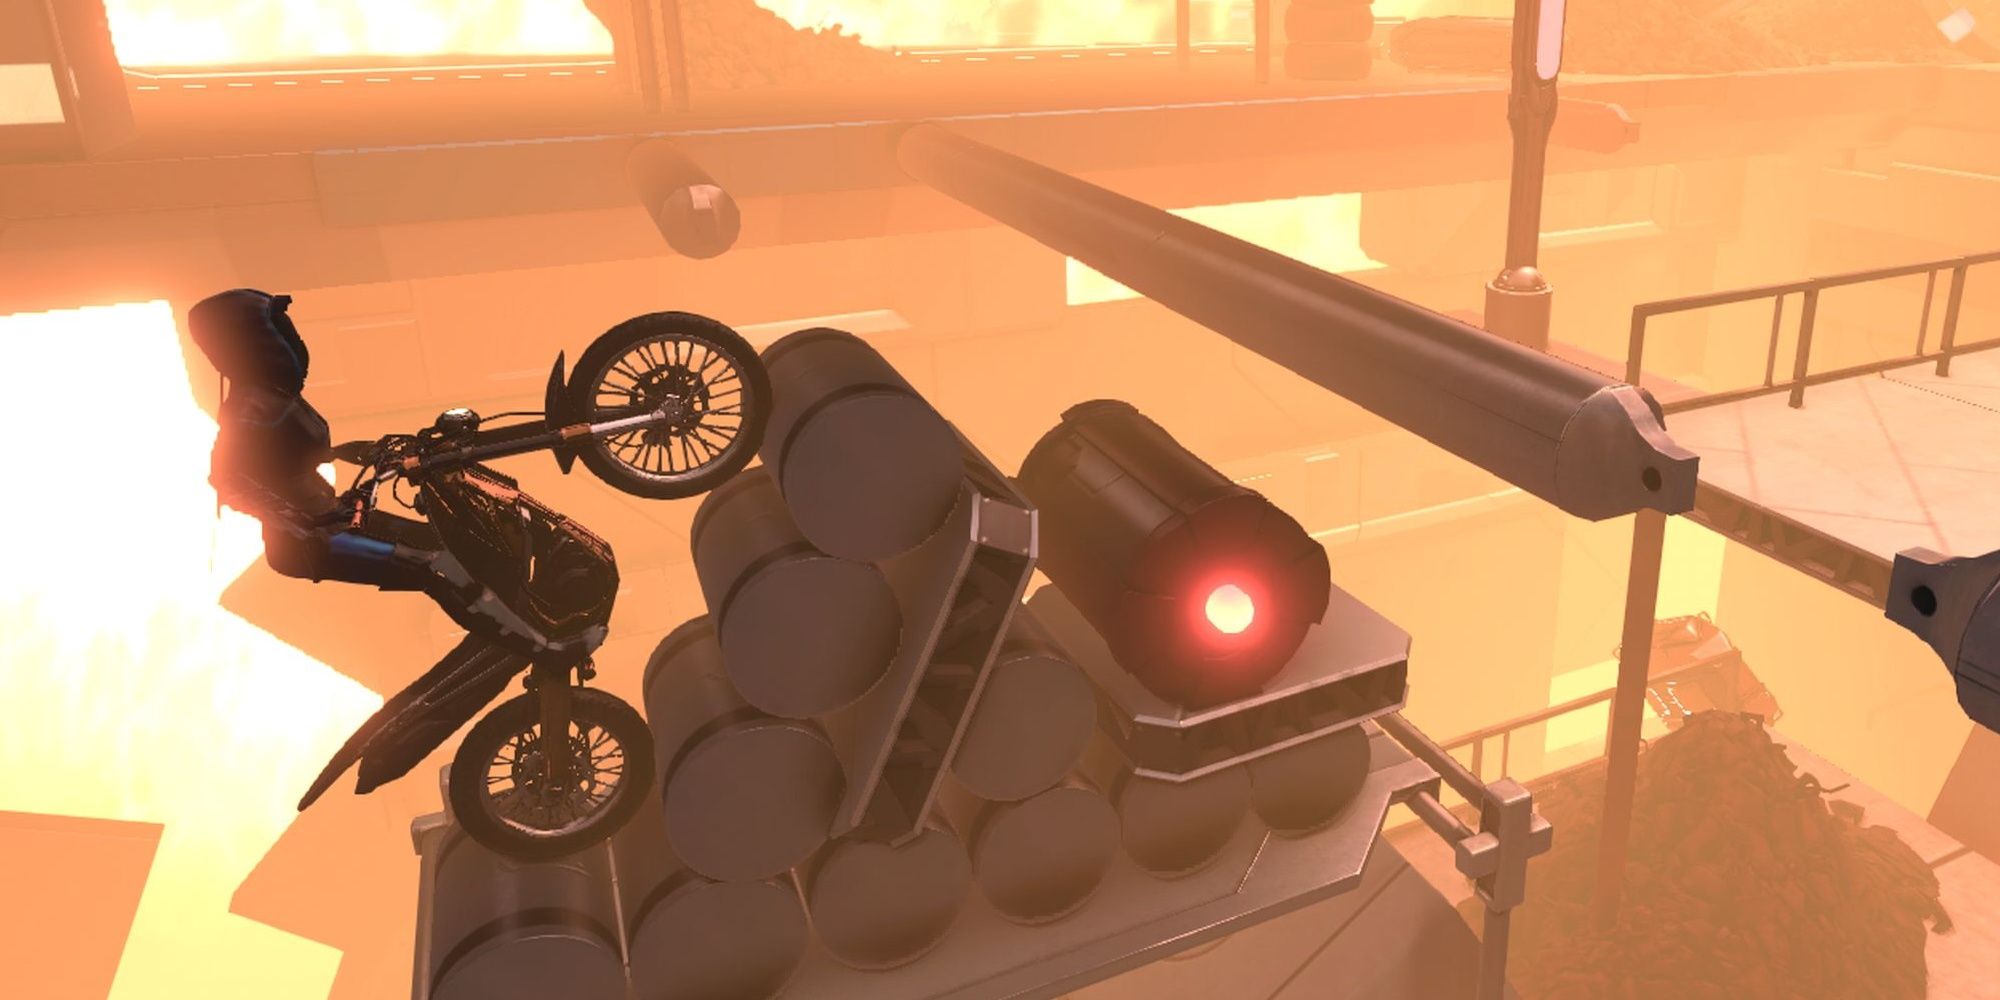 The female tester must overcome this difficult obstacle with the help of an exploding barrel in Trials Fusion.